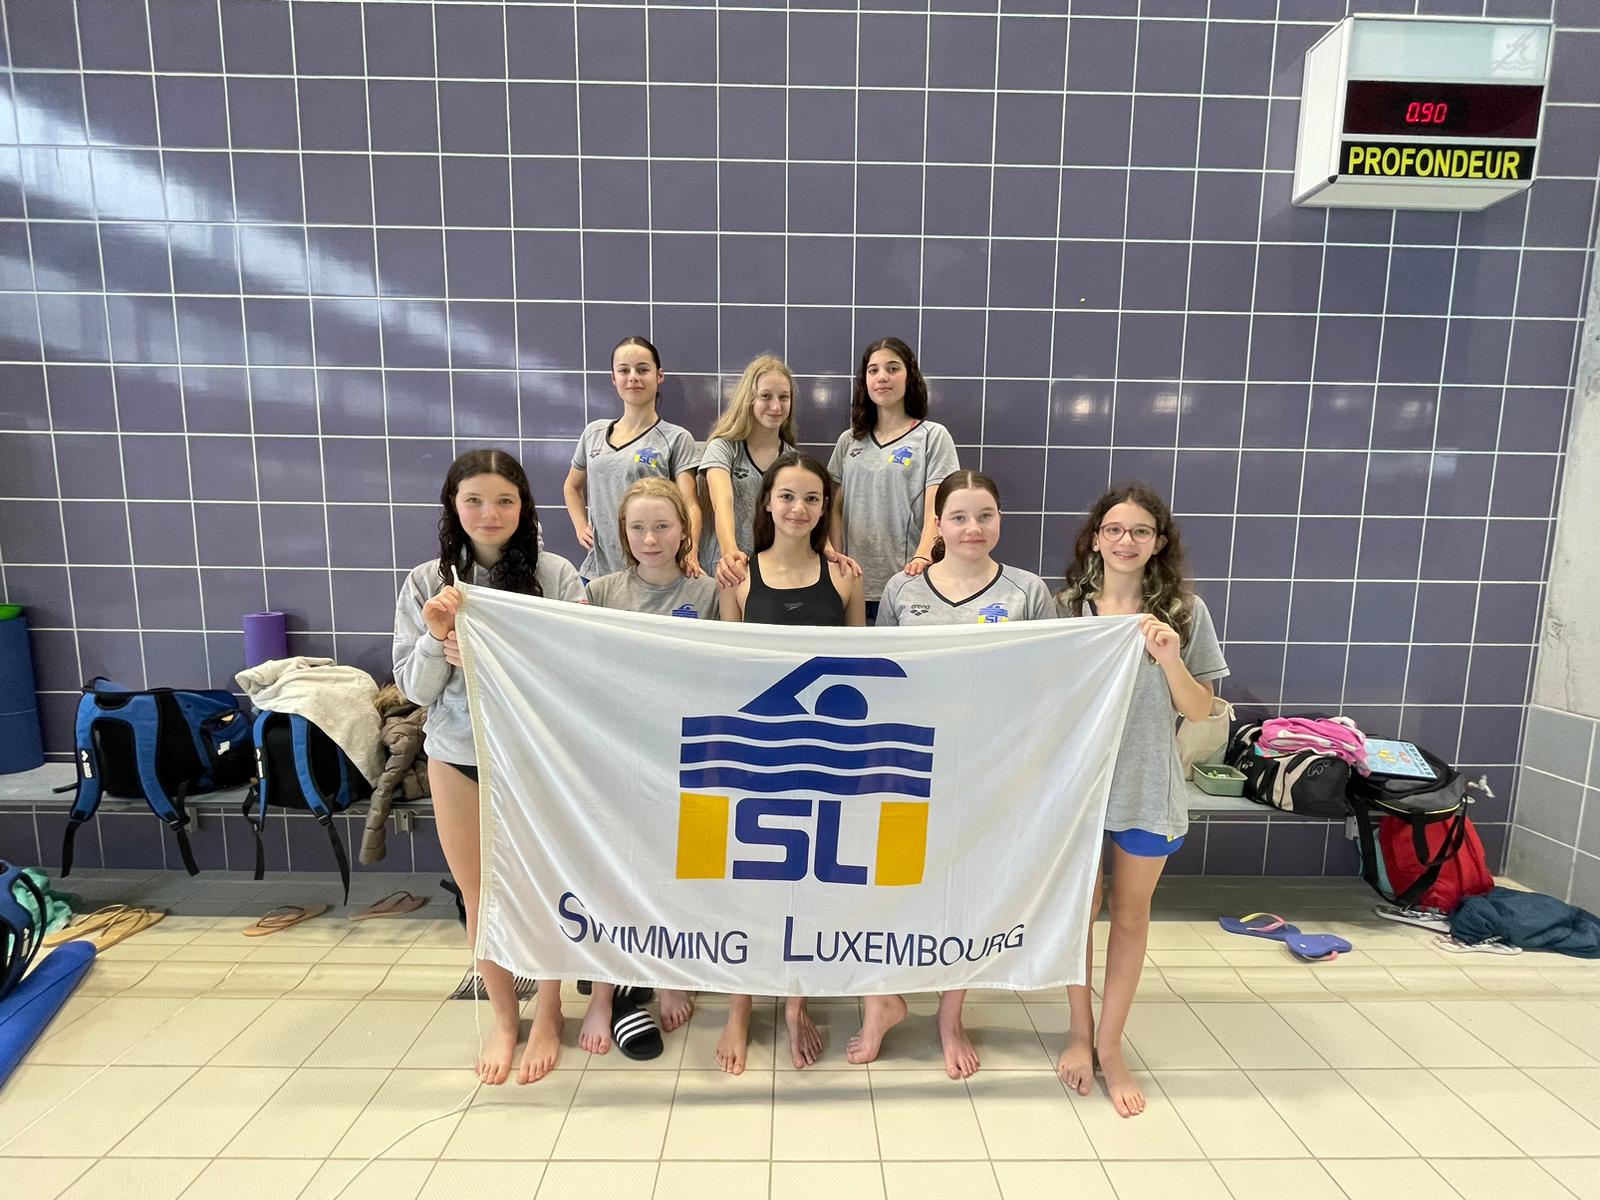 💥 SL Youth Artistic Swimming Group at the Belgian Wolf Cup 💥